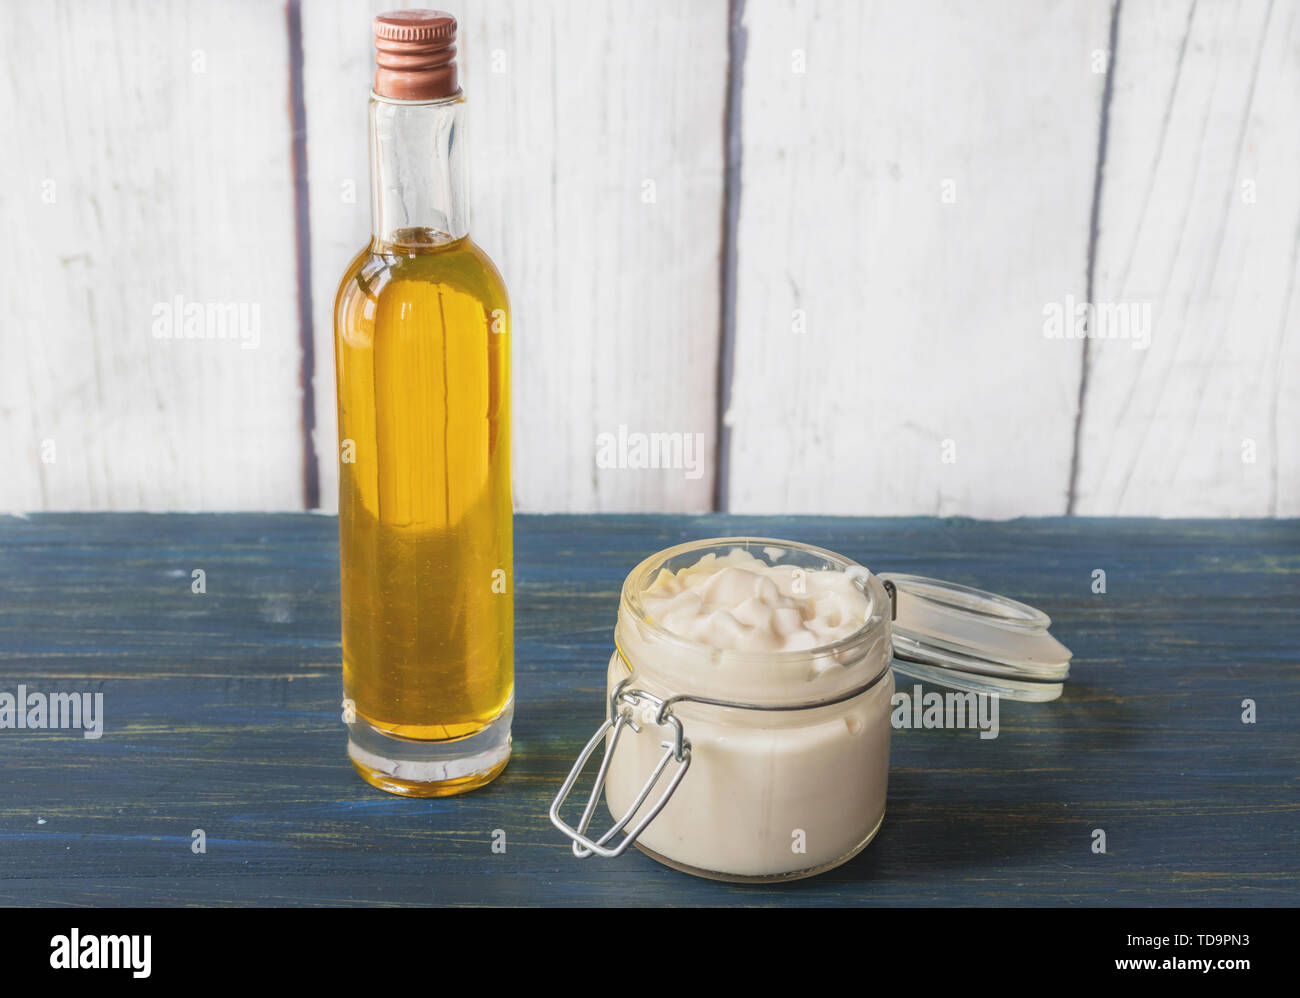 Homemade facial cream of argan oil, in a glass jar with bottle of oil to the side, on a wooden background Stock Photo